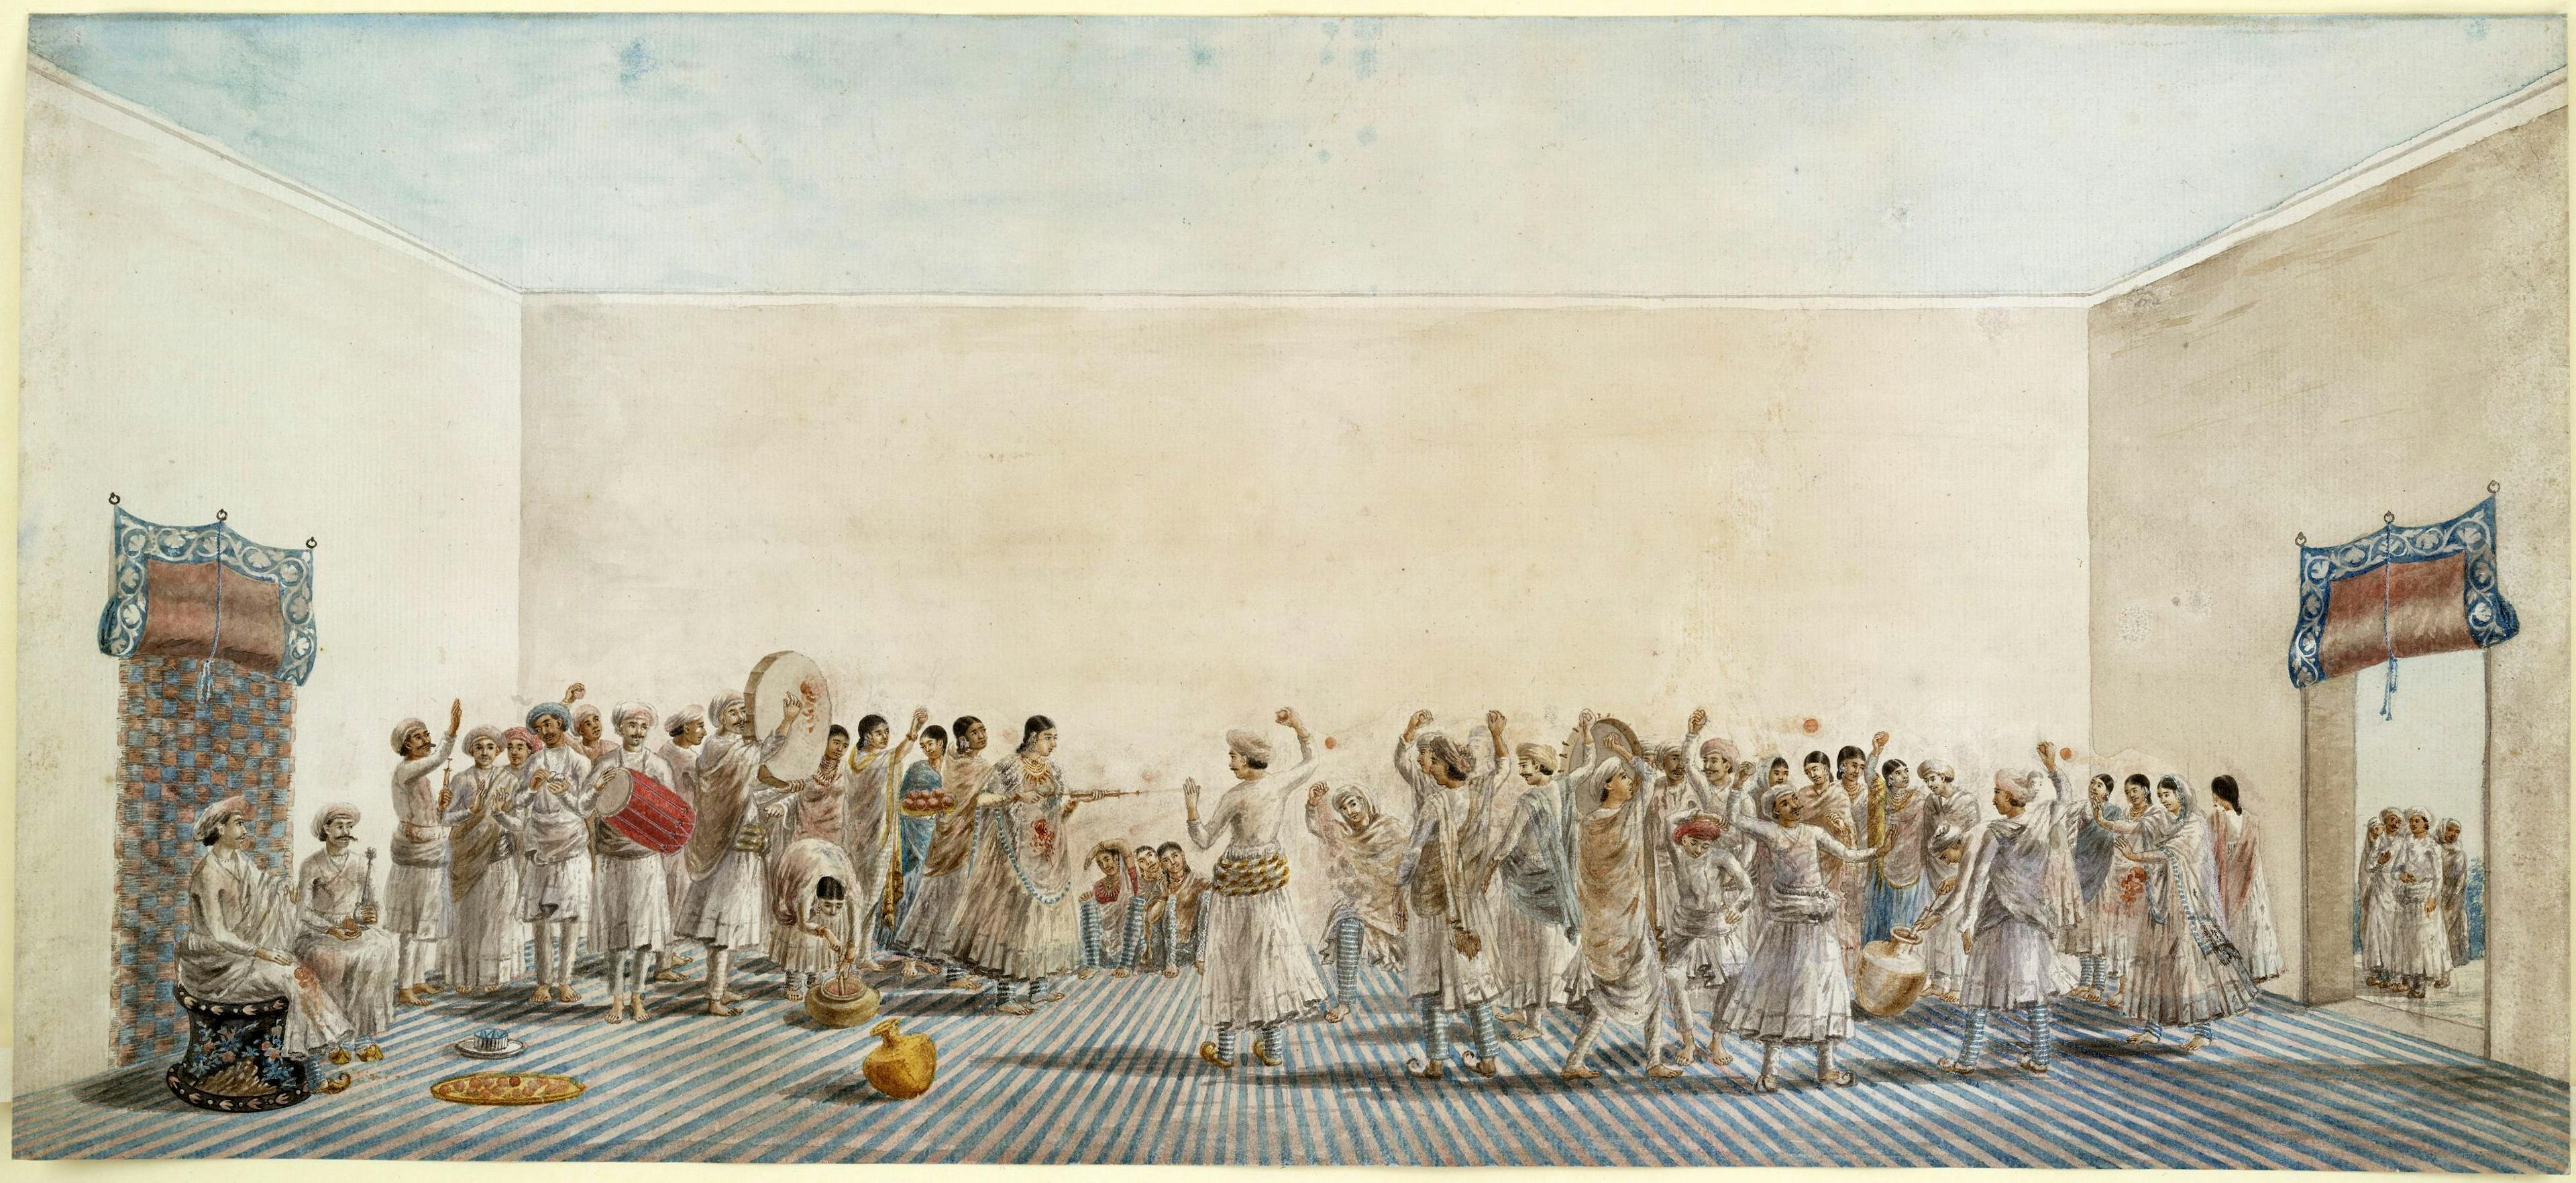 Holi being played in the courtyard, ca. 1795 painting